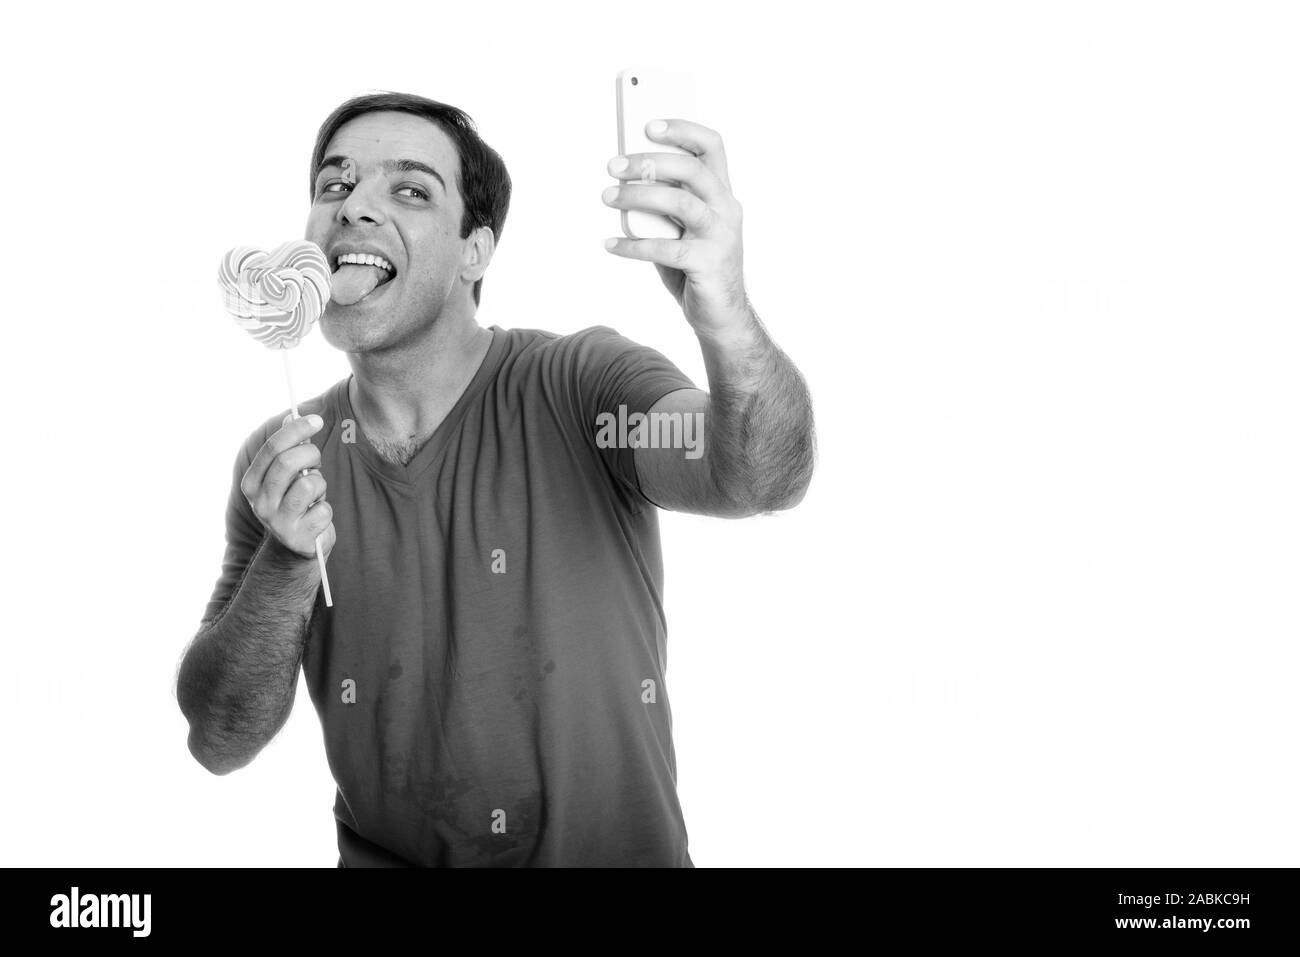 Happy Persian man smiling and taking selfie picture with mobile phone while licking heart shaped lollipop Stock Photo